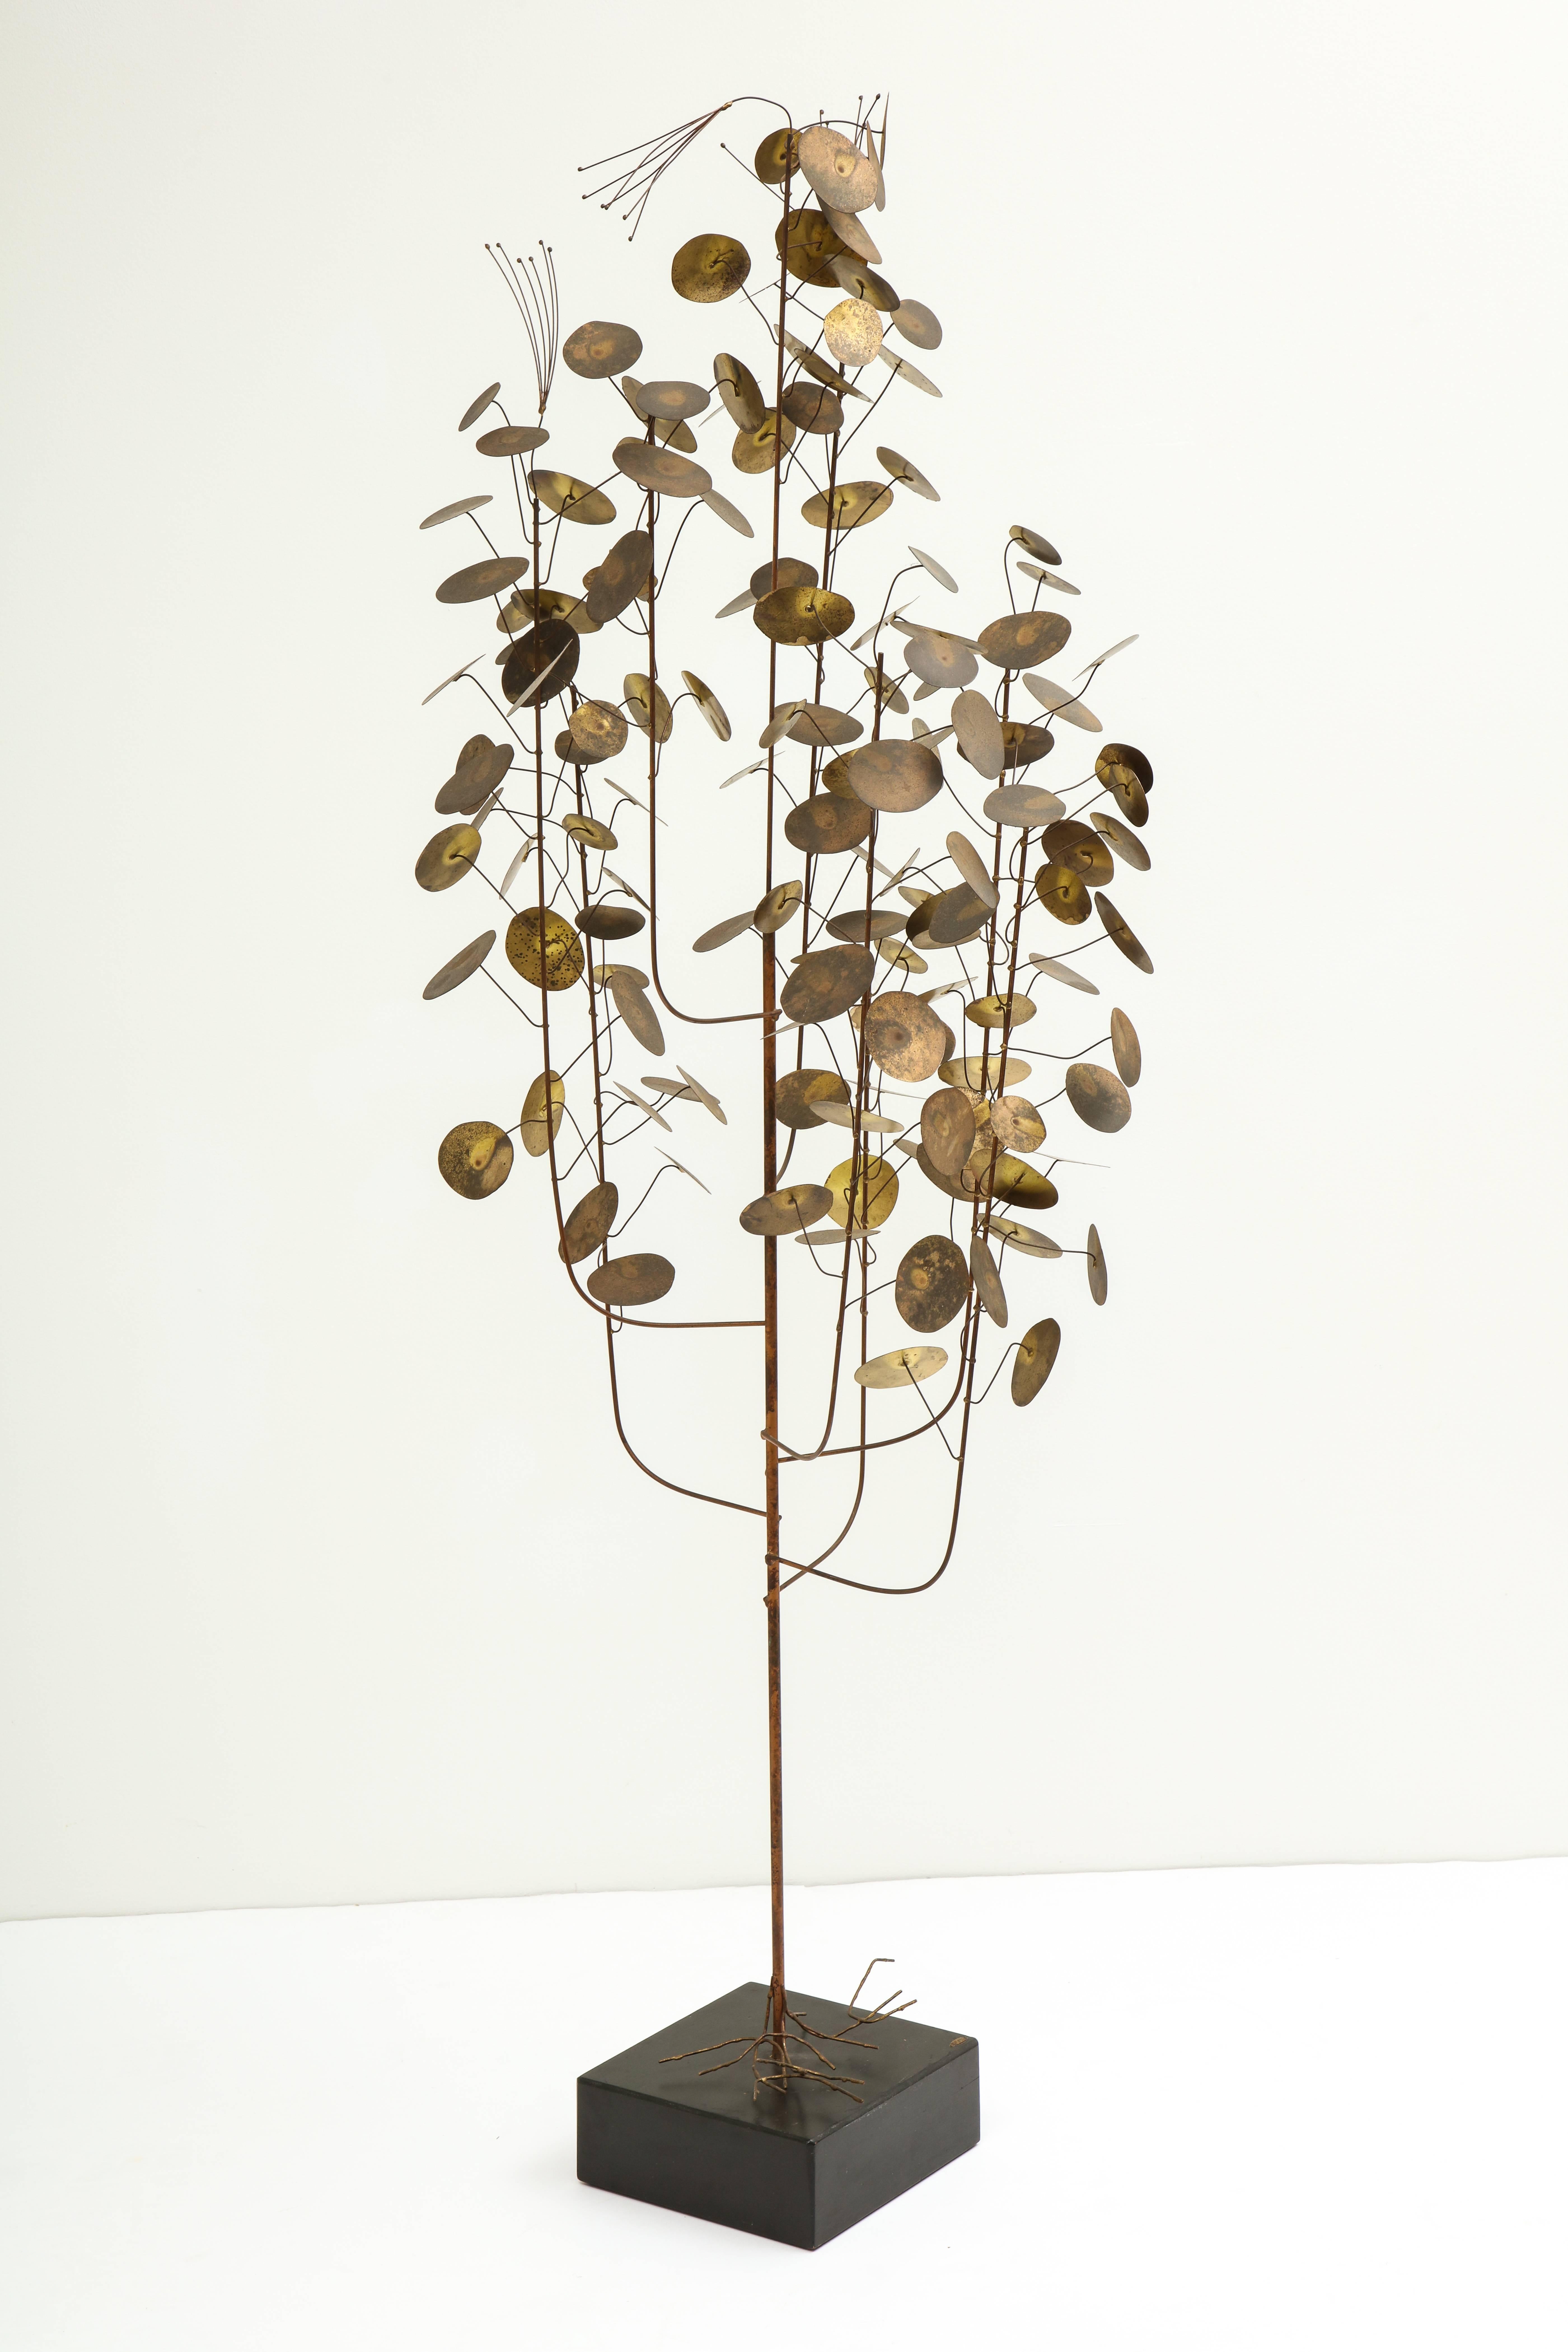 By far the most sought after style Jere produced. The Raindrops tree is one of the rarer forms.